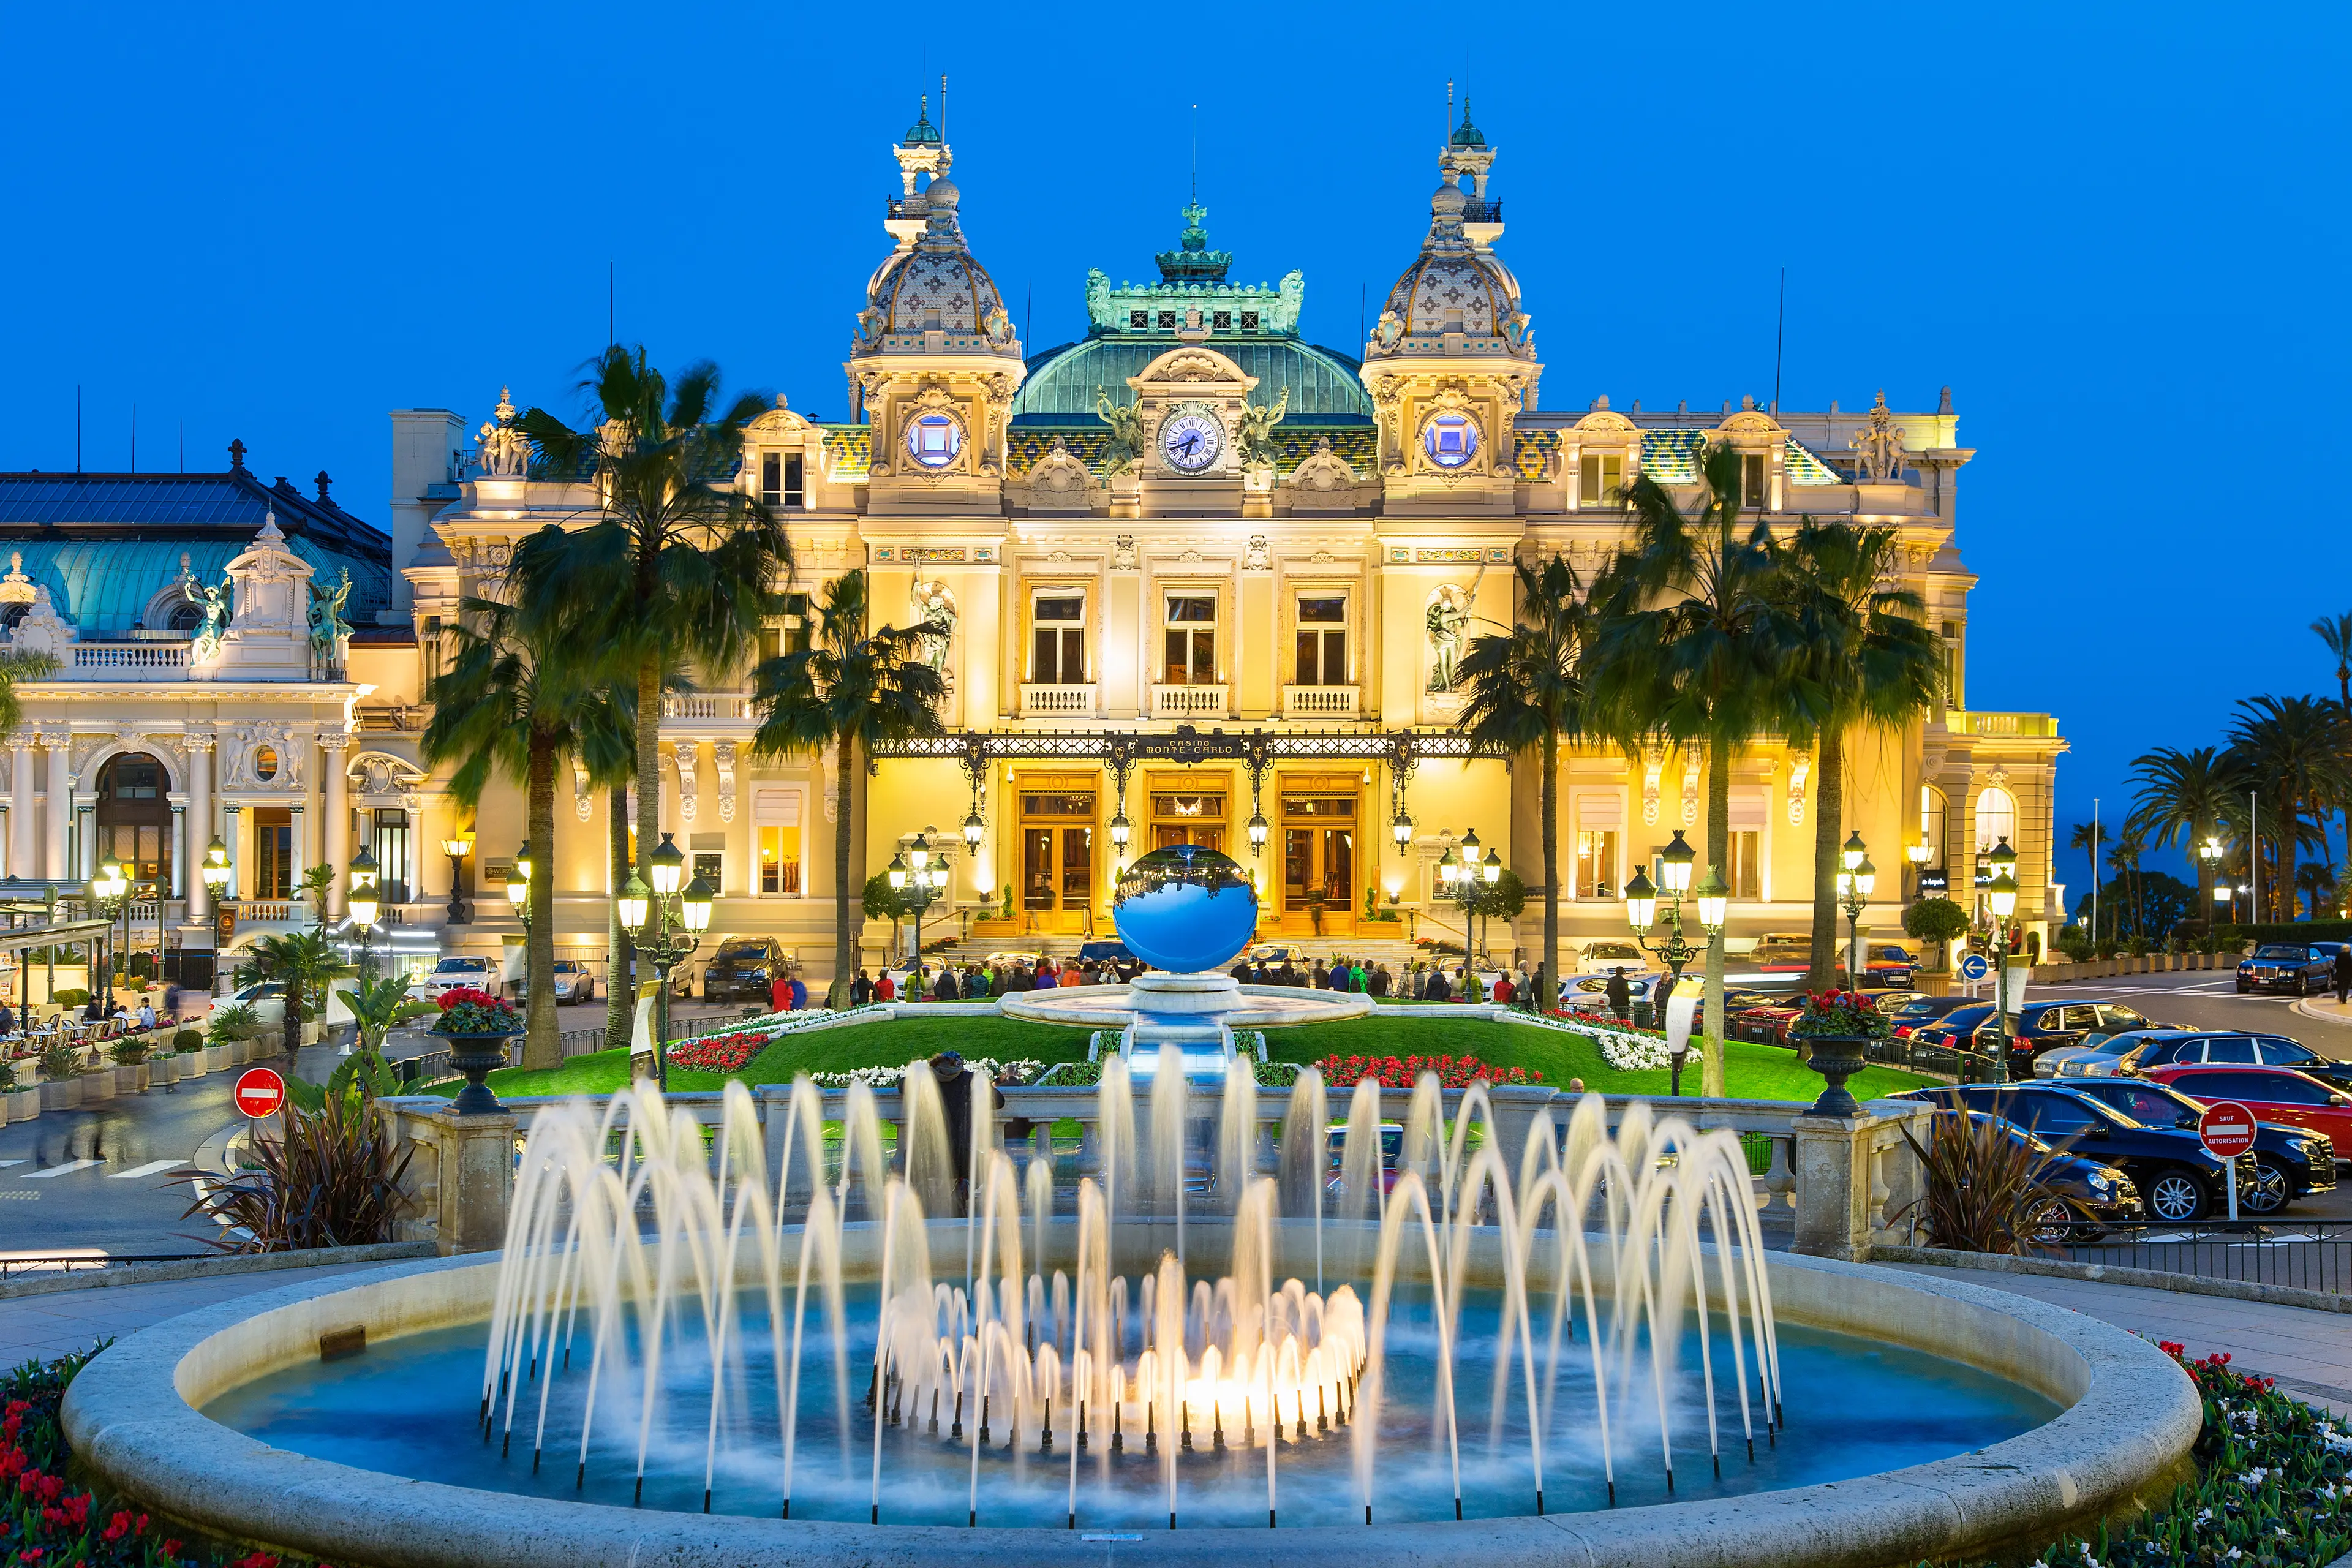 3-Day French Riviera Tour: Sightseeing, Food & Wine with Friends